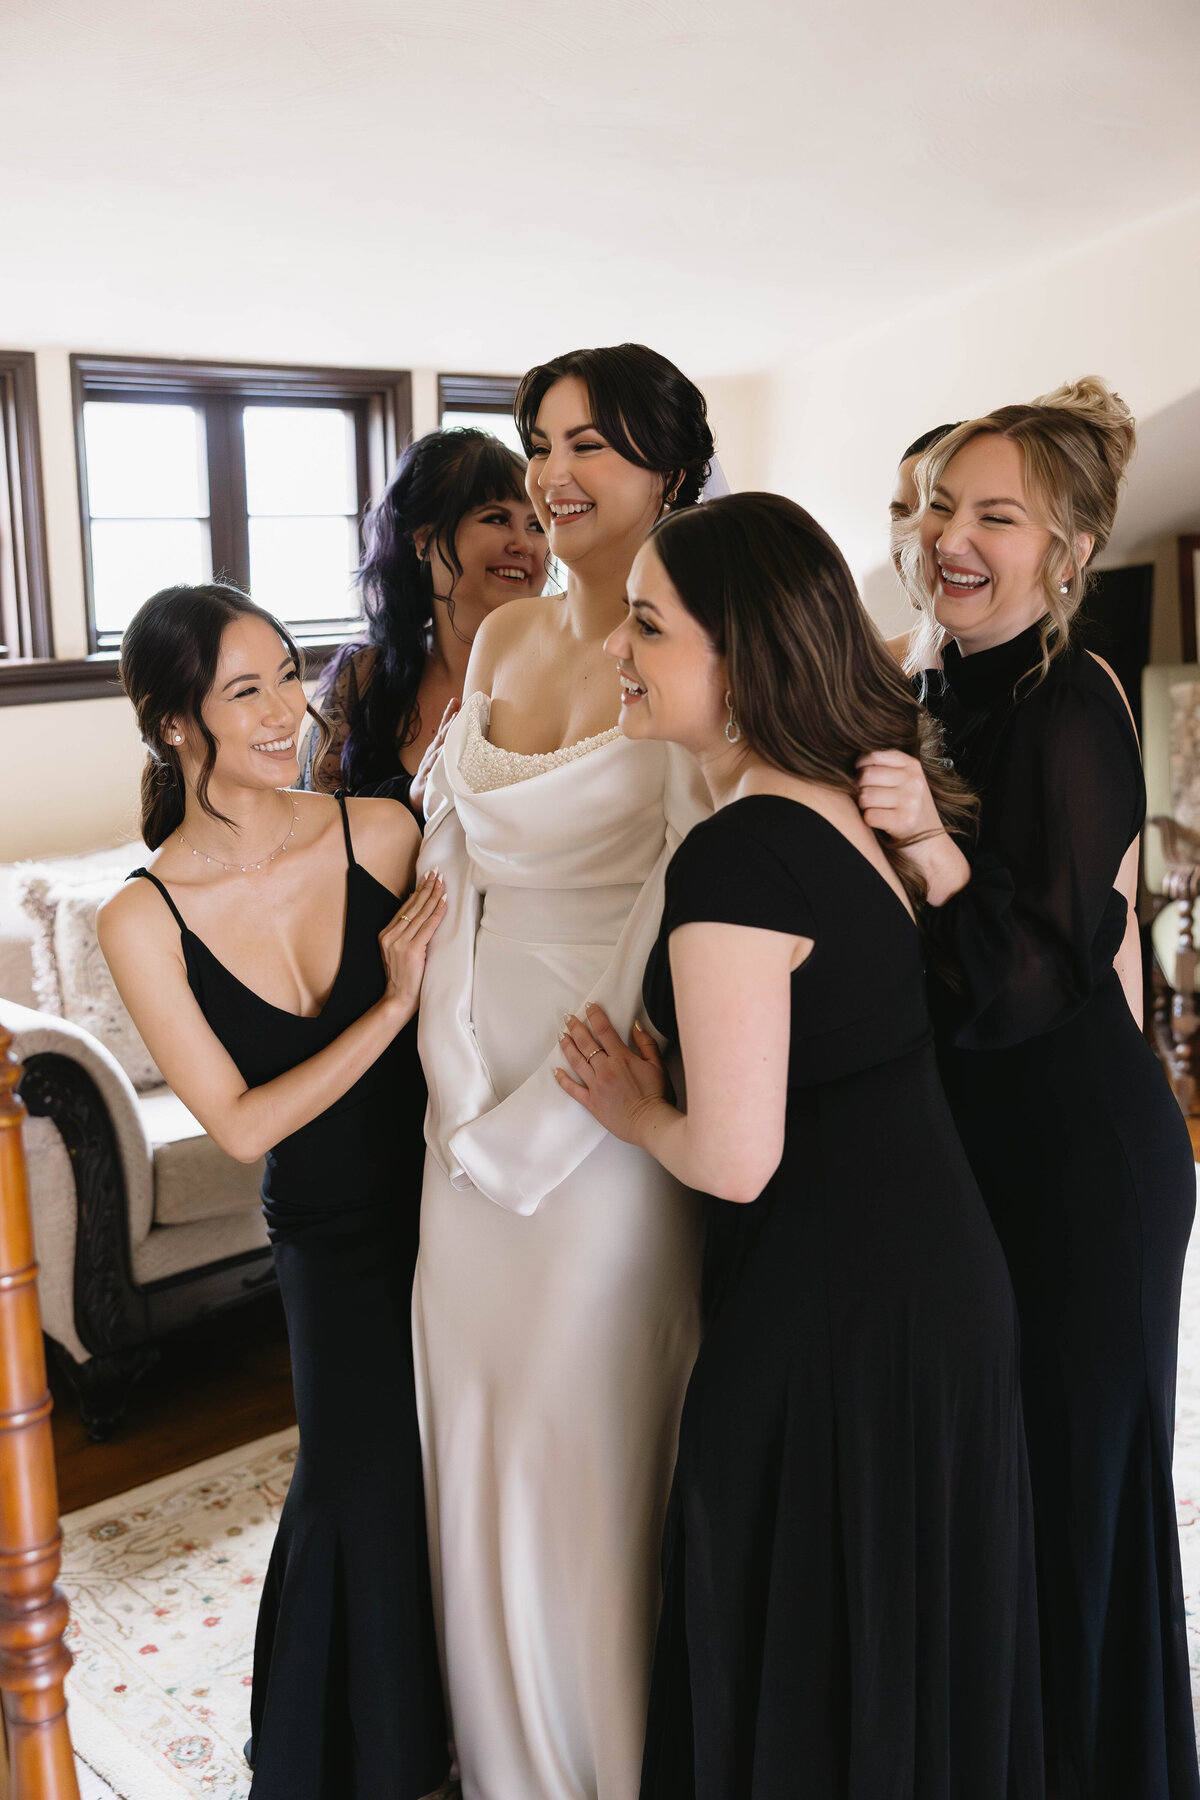 Getting ready, bride with bridesmaids